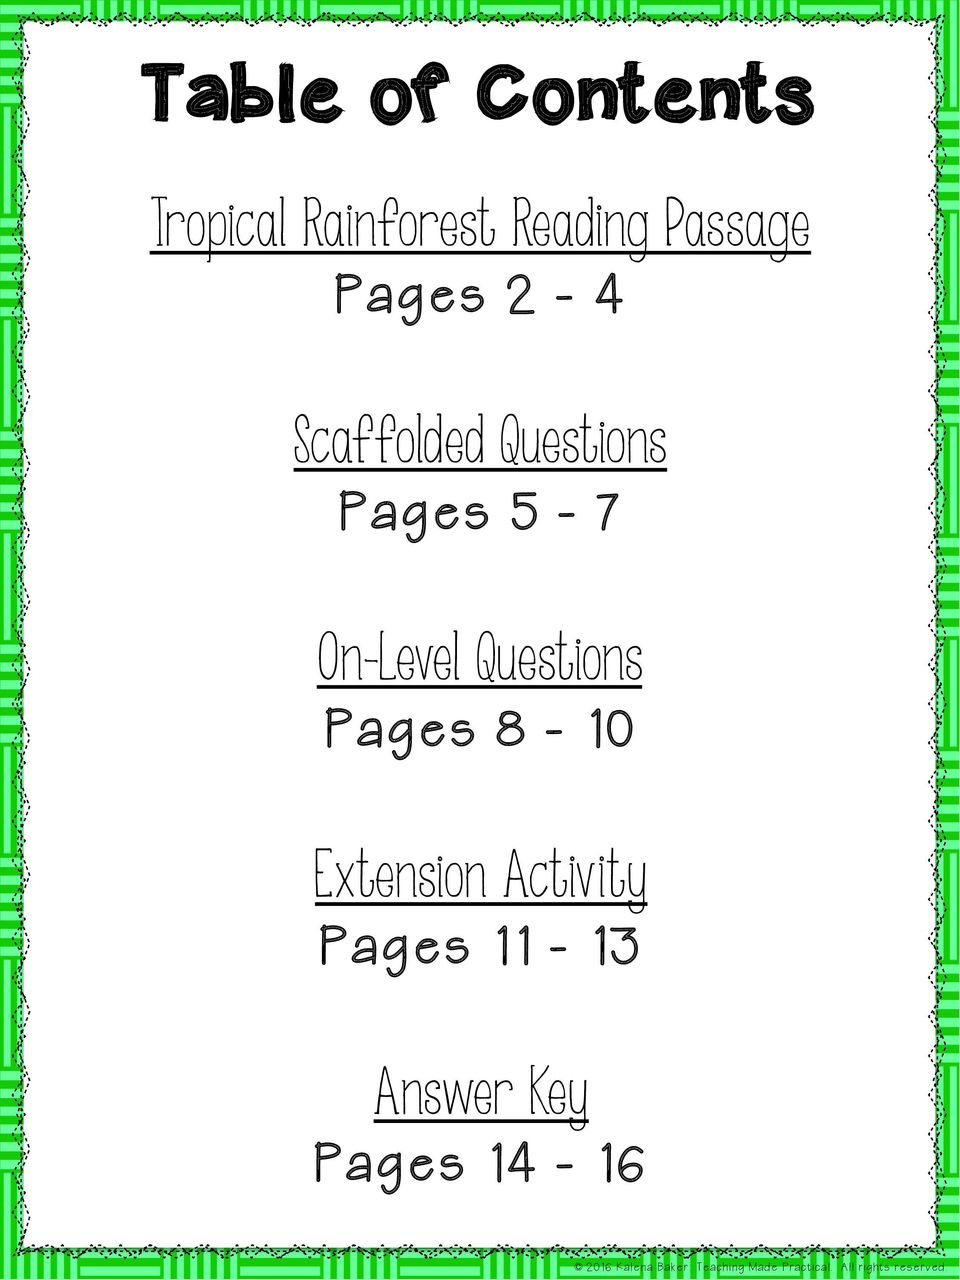 Questions Pages 5-7 On-Level Questions Pages